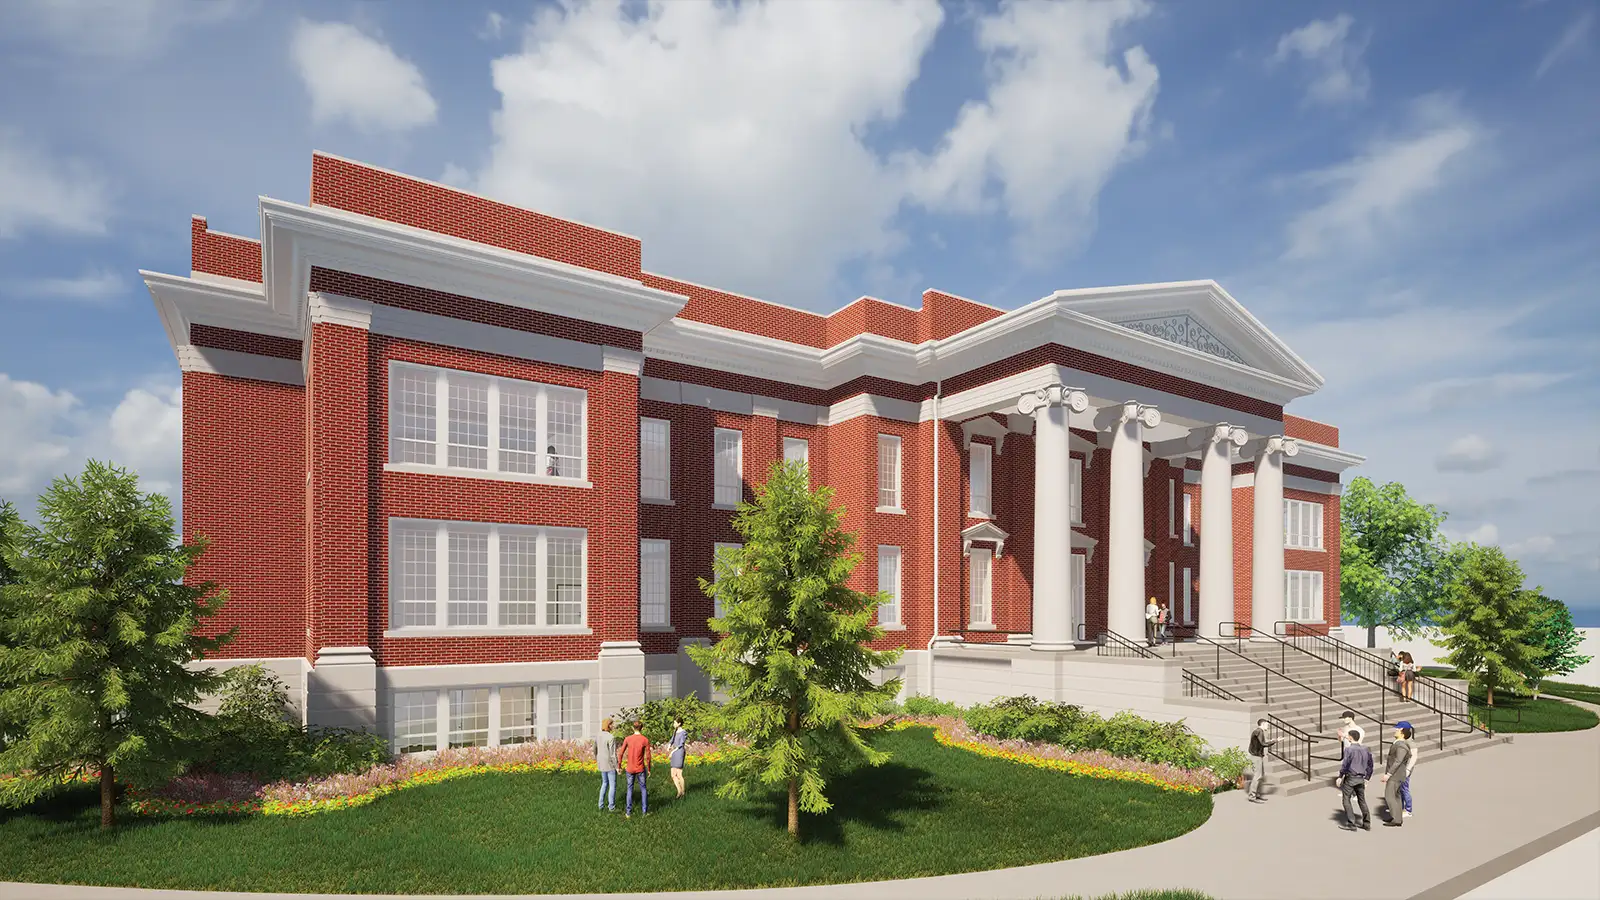 A rendering of the new Shawnee Hall